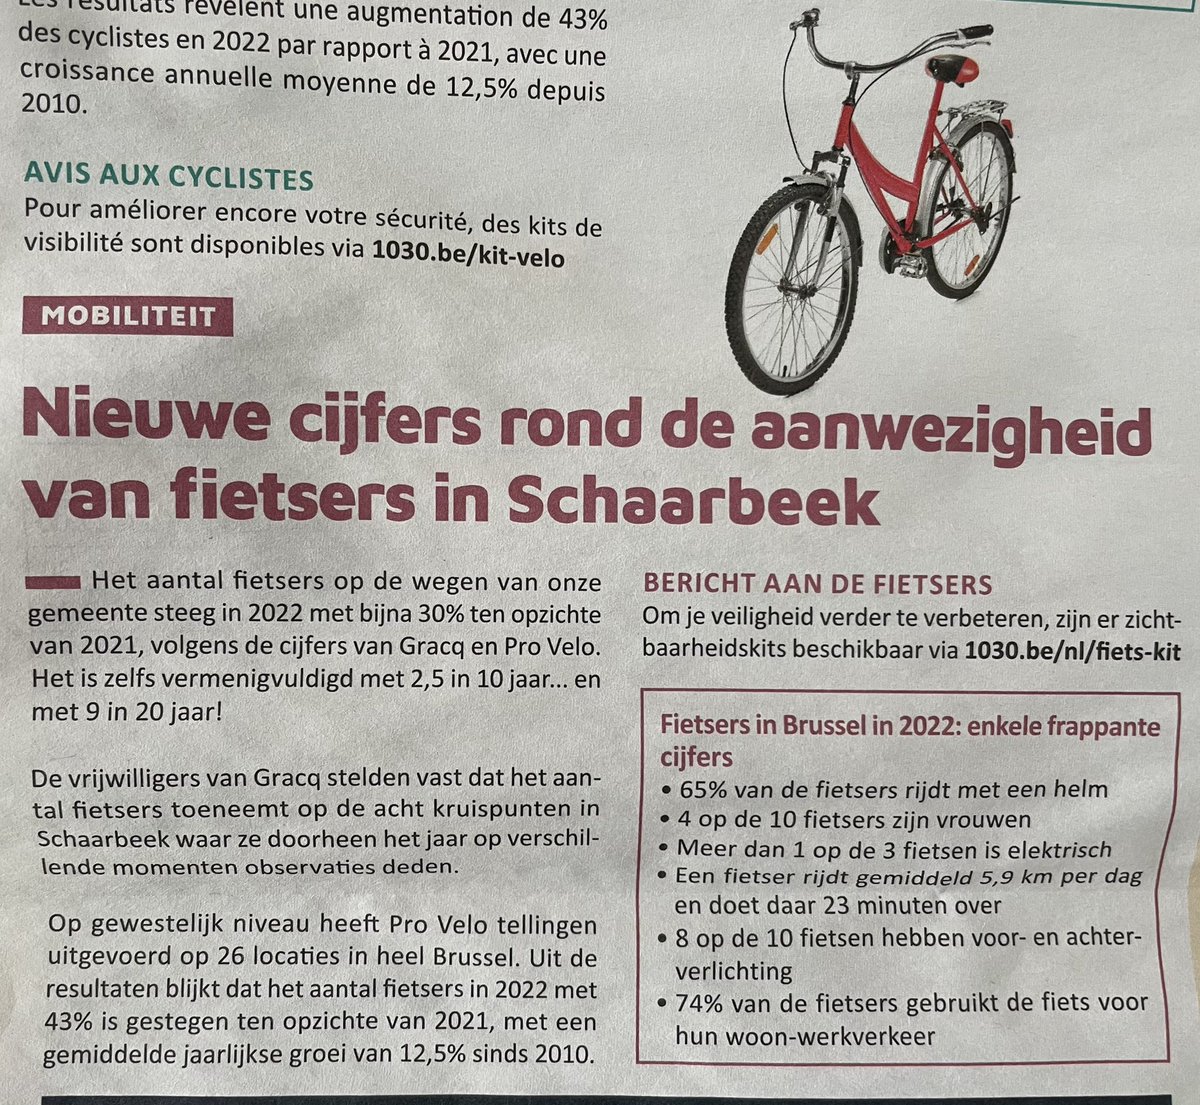 #MoreCycling 🚲🚲 in #Schaarbeek: 30% more cyclists in 2022 compared to 2021. Over 1/3 of bikes are #ebikes. #WeLoveGoodMove ❤️